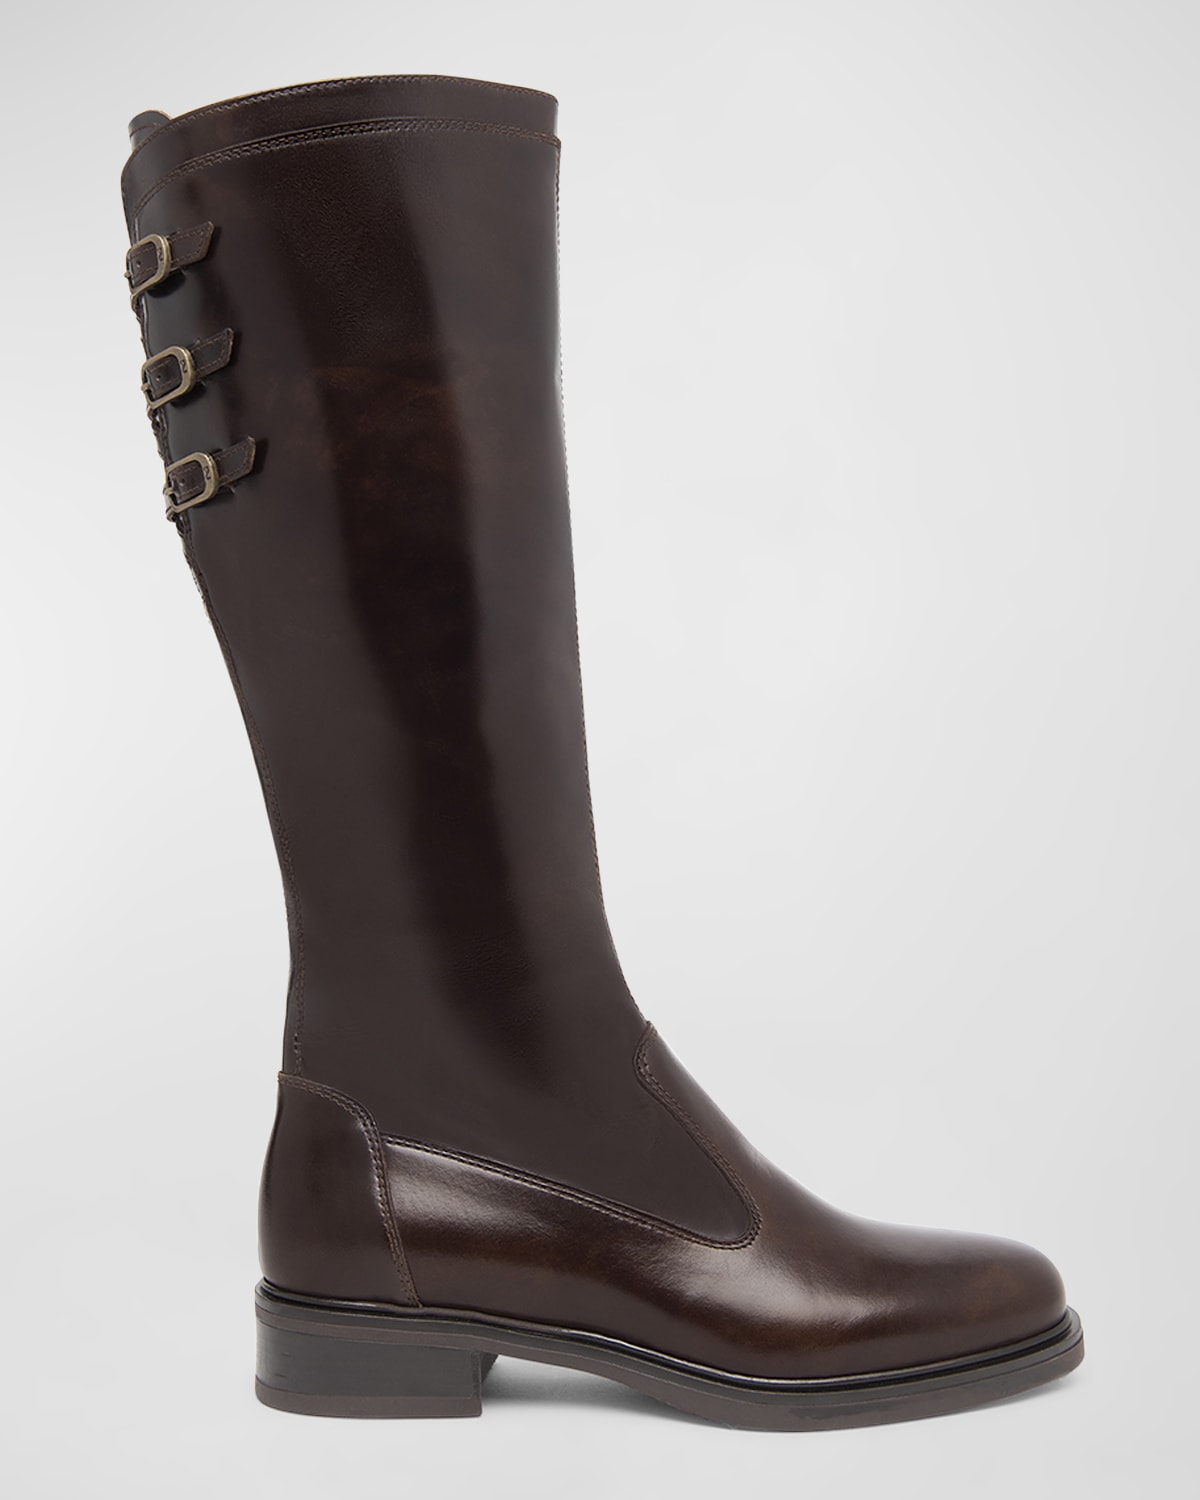 Leather Buckle Riding Boots